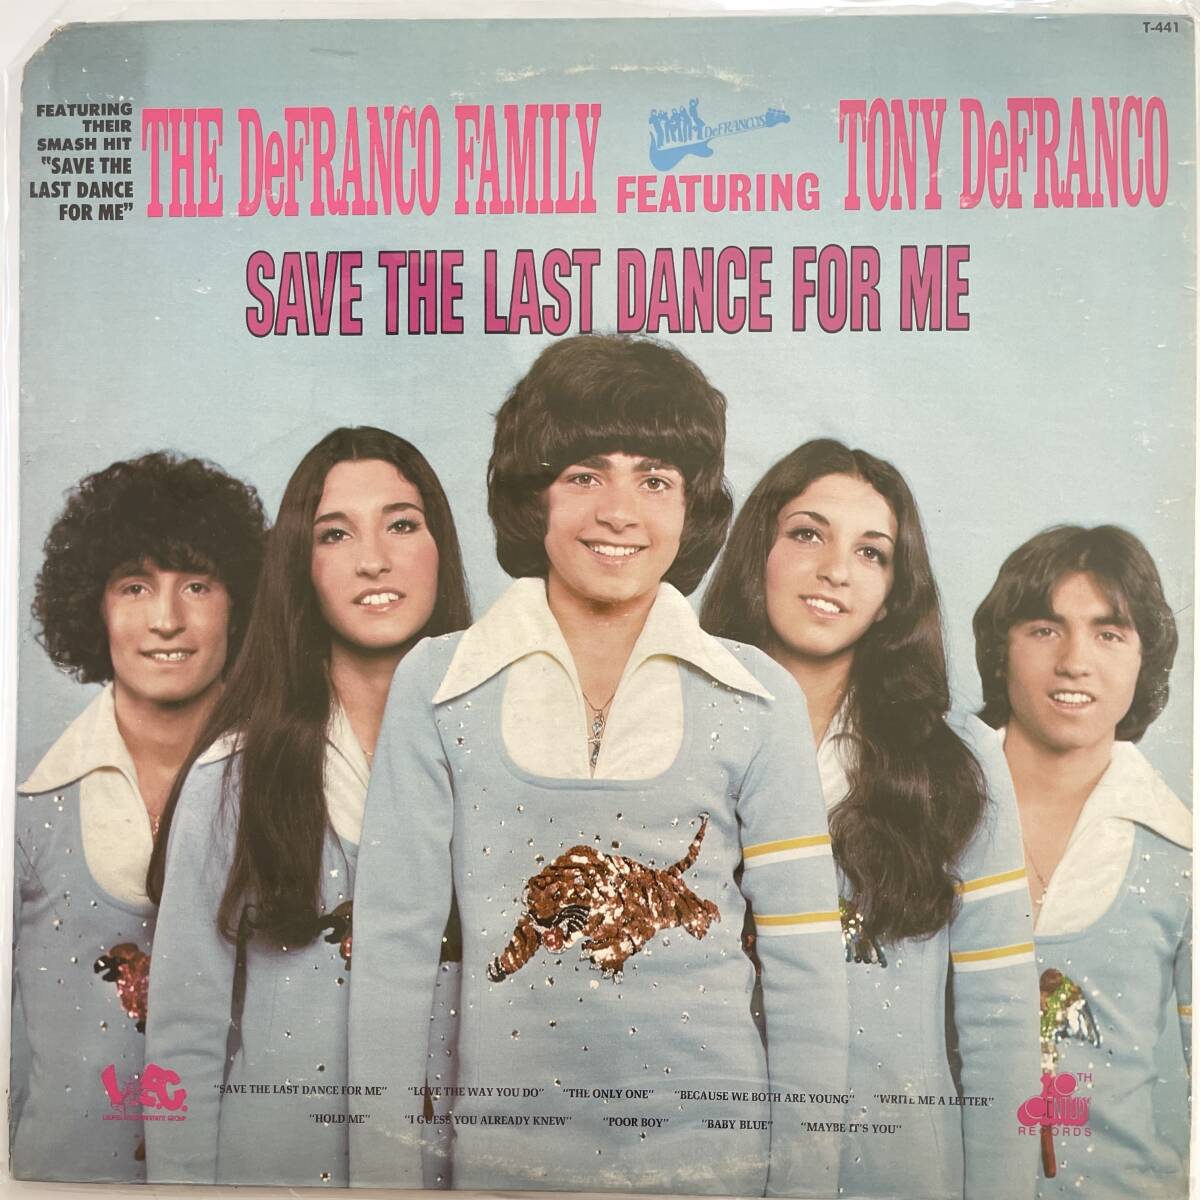 THE DeFRANCO FAMILY / SAVE THE LAST DANCE FOR ME US盤 1974年 オリジナルの画像1